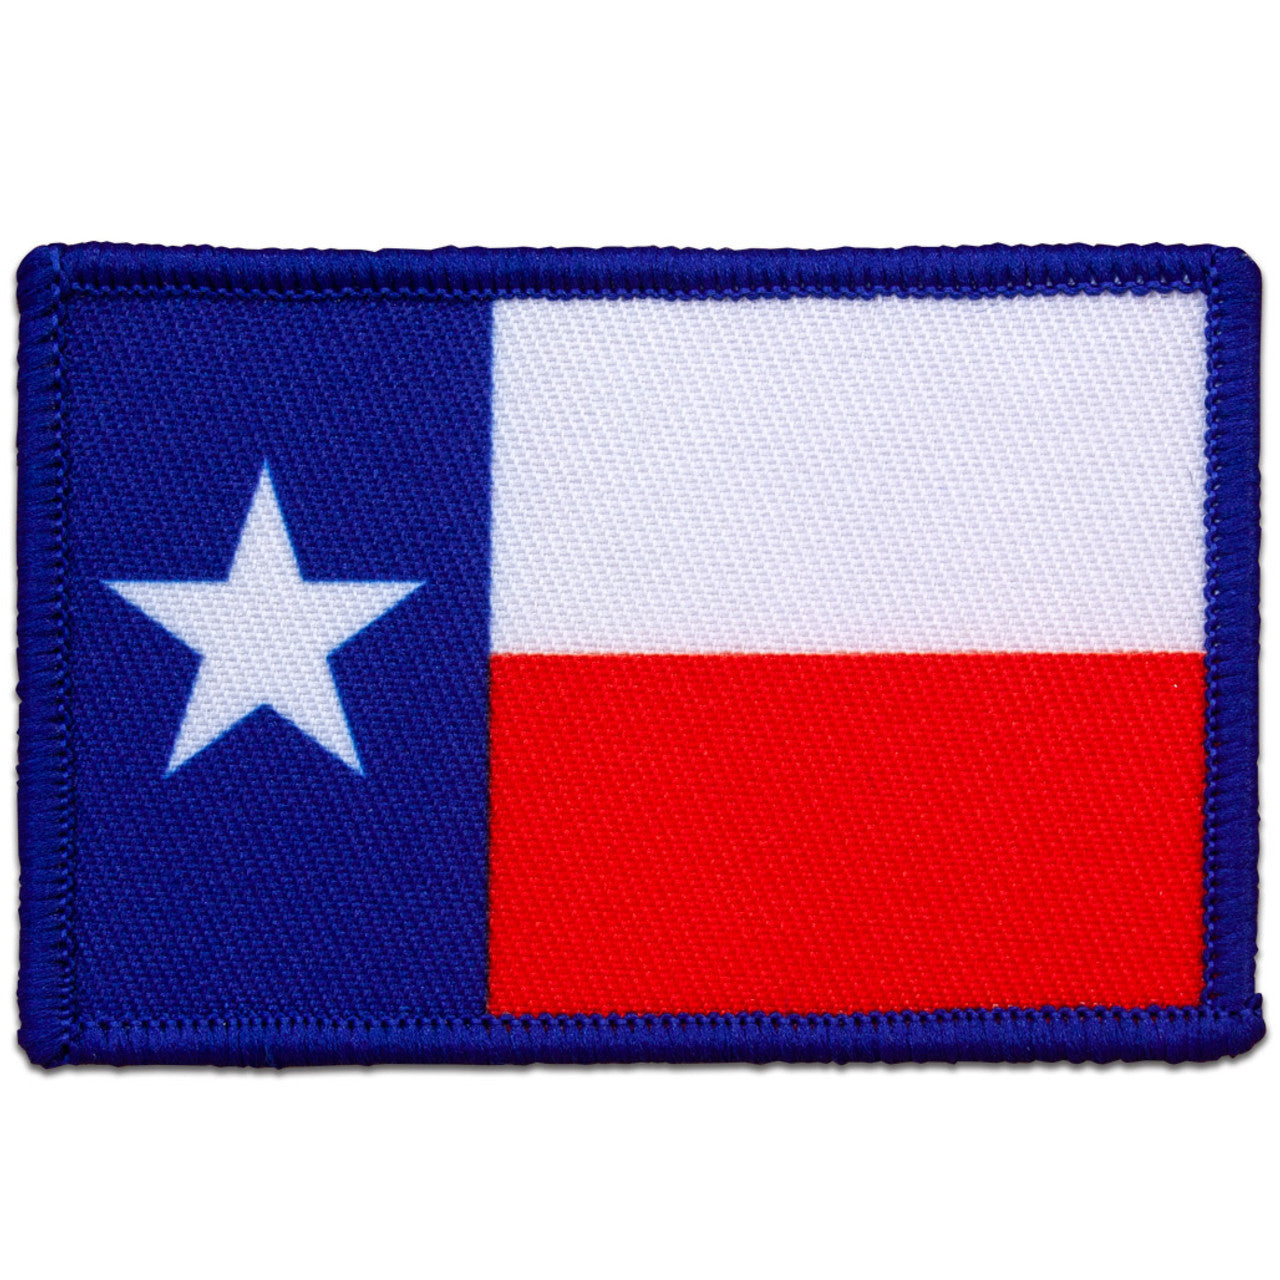 "TEXAS FLAG" MORALE PATCH